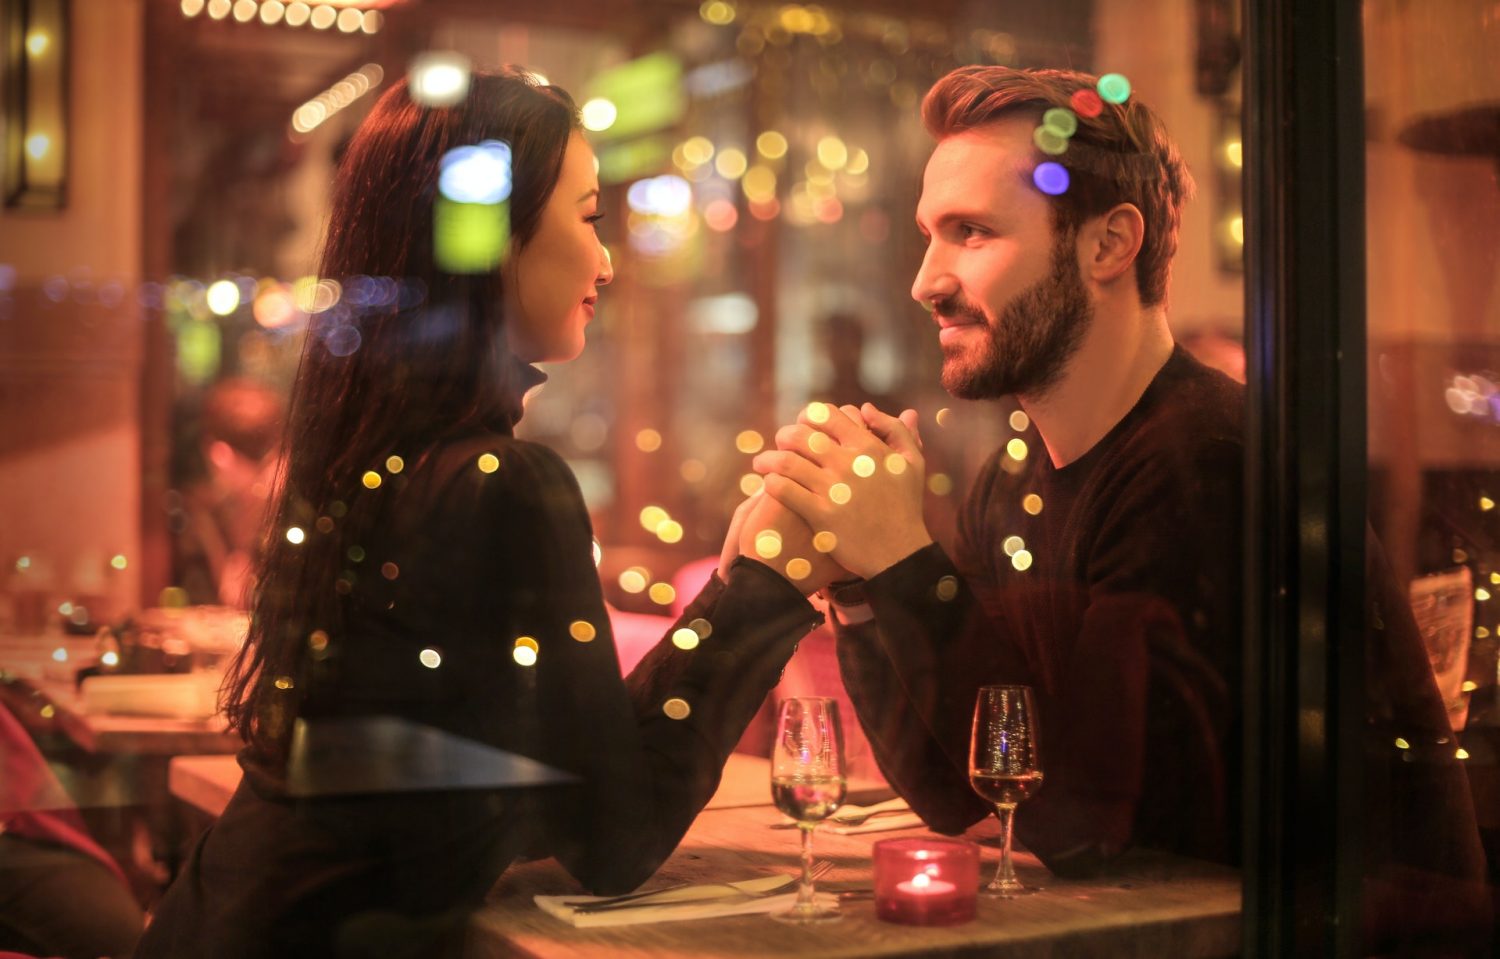 How You Will Meet Your Soulmate Based On Your Zodiac Sign